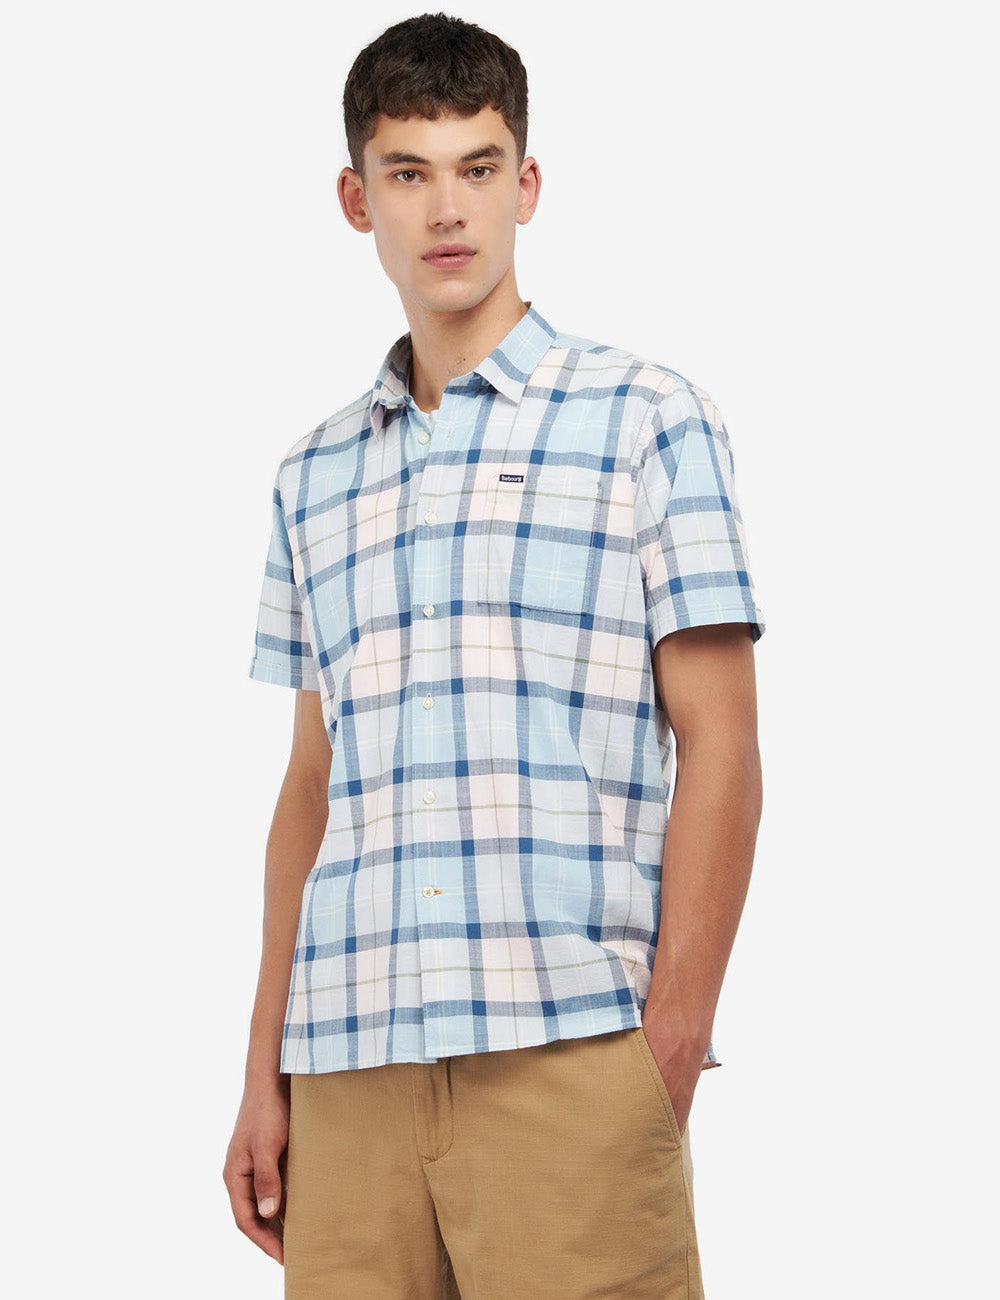 Man wearing the Barbour Gordon Shirt with beige shorts